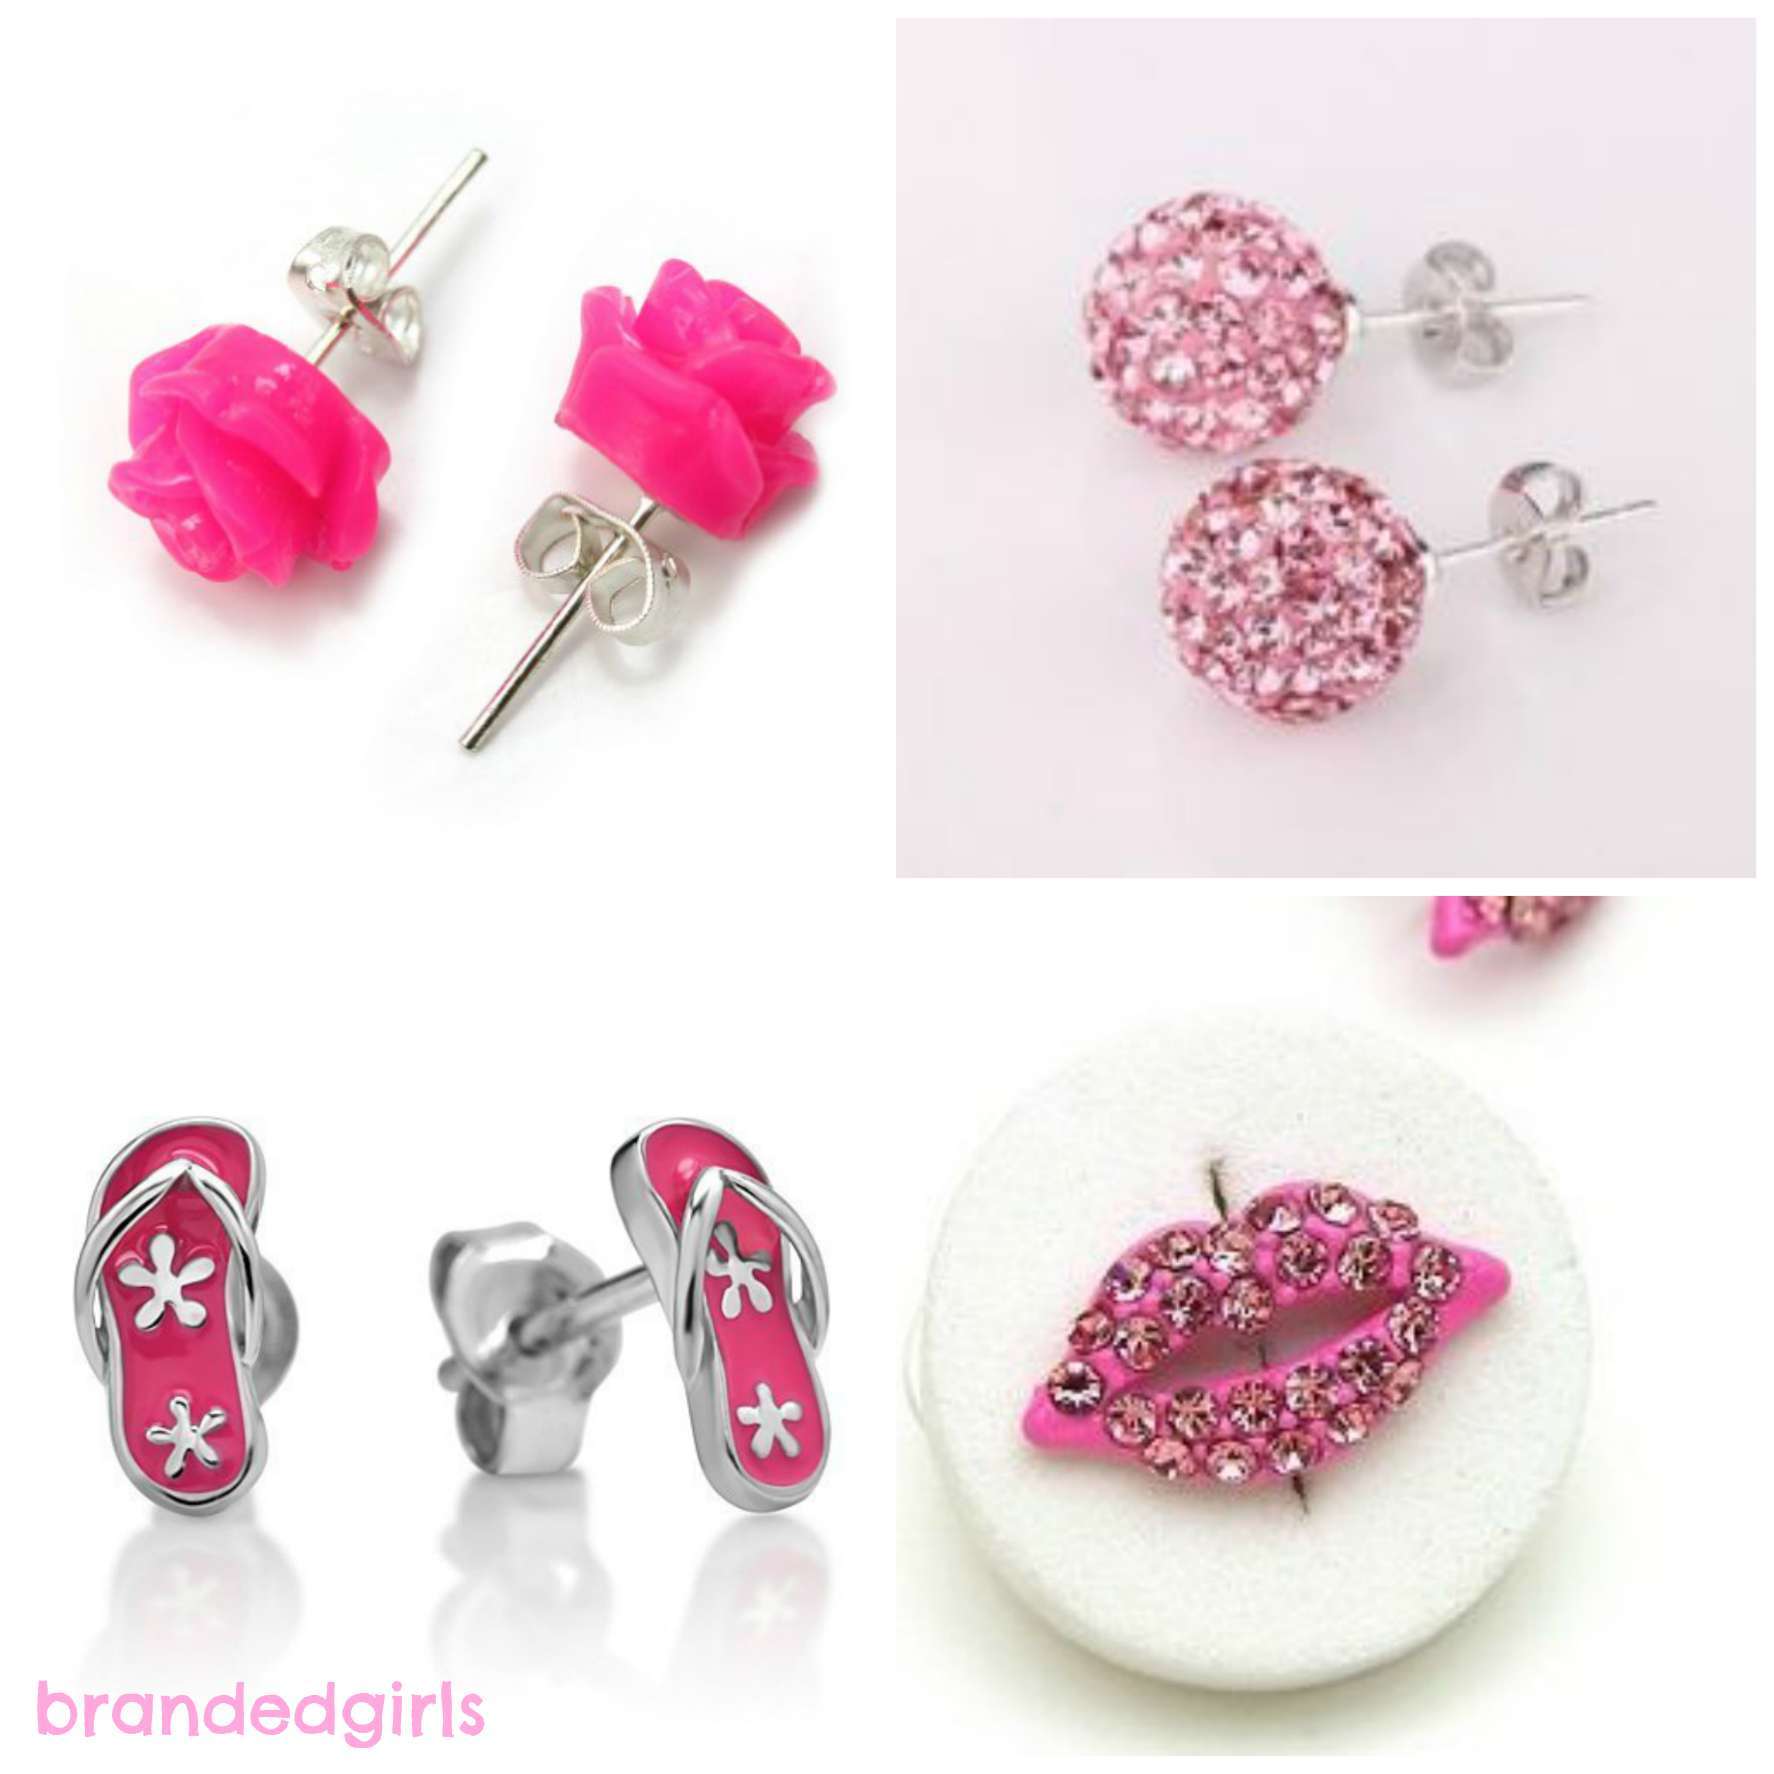 15 Cute Pink Accessories Every Teen Girl Needs To have These Days